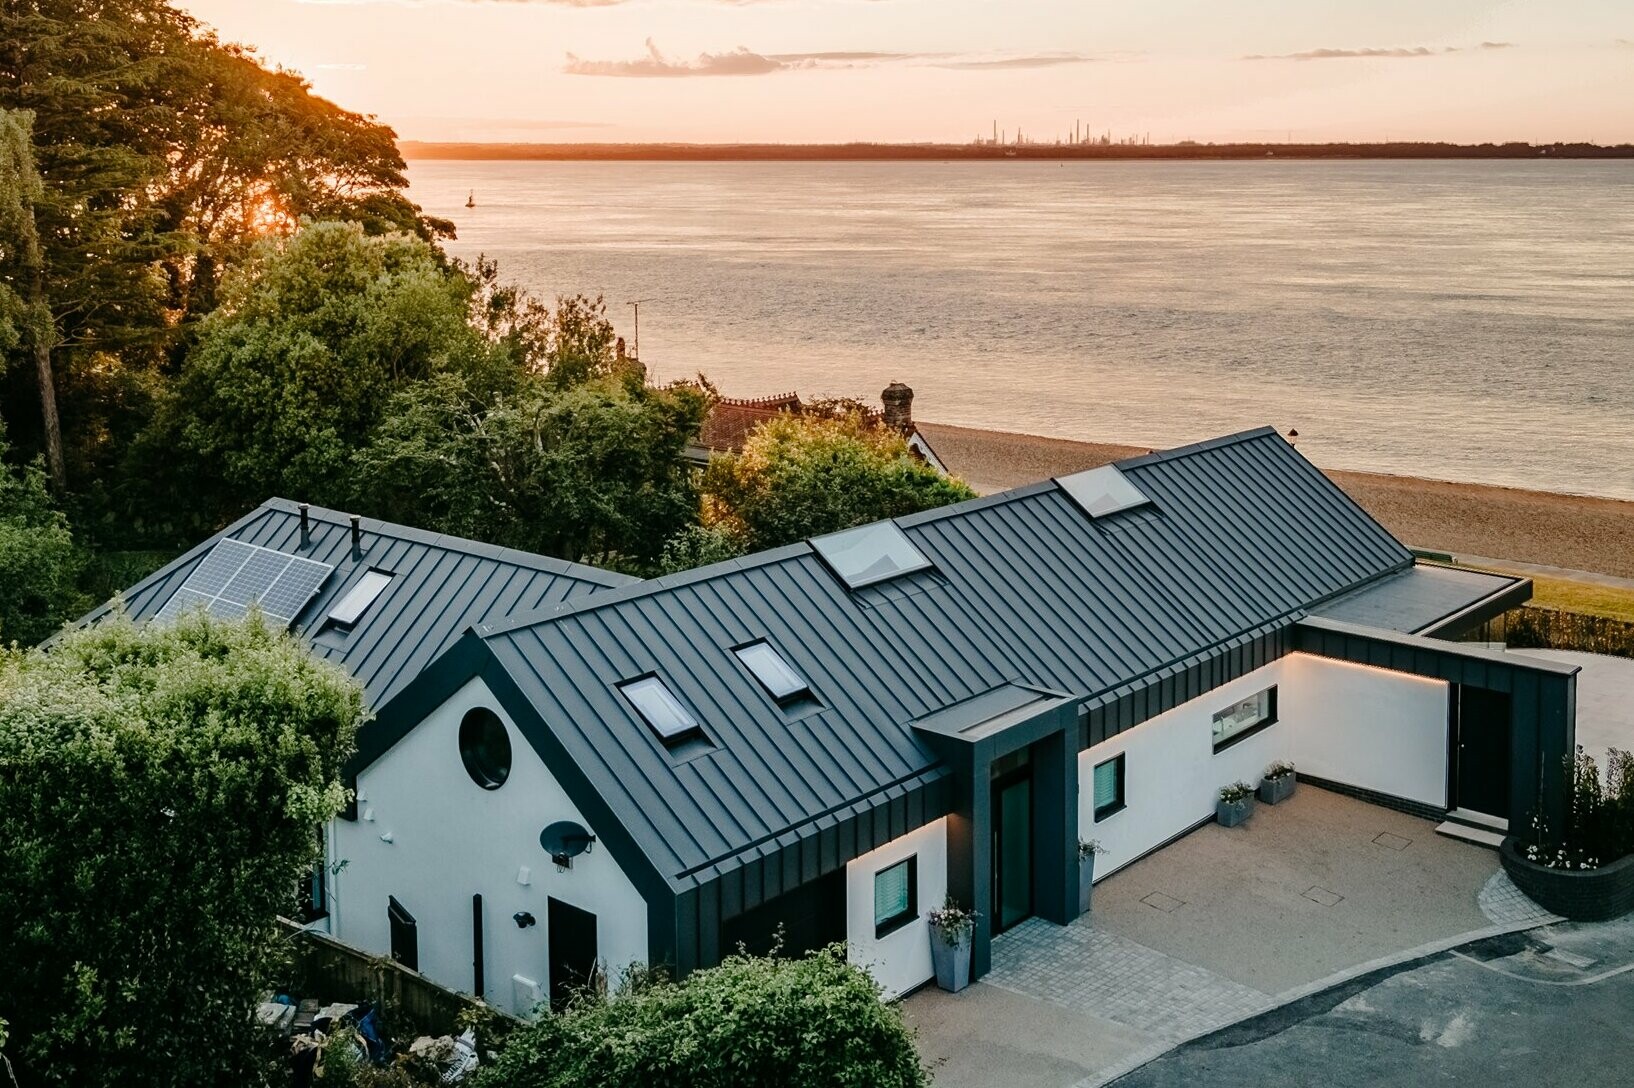 Bungalow on Isle of Wight from birds eye view to the sea, roofed with PREFA PREFALZ in P.10 dark grey.